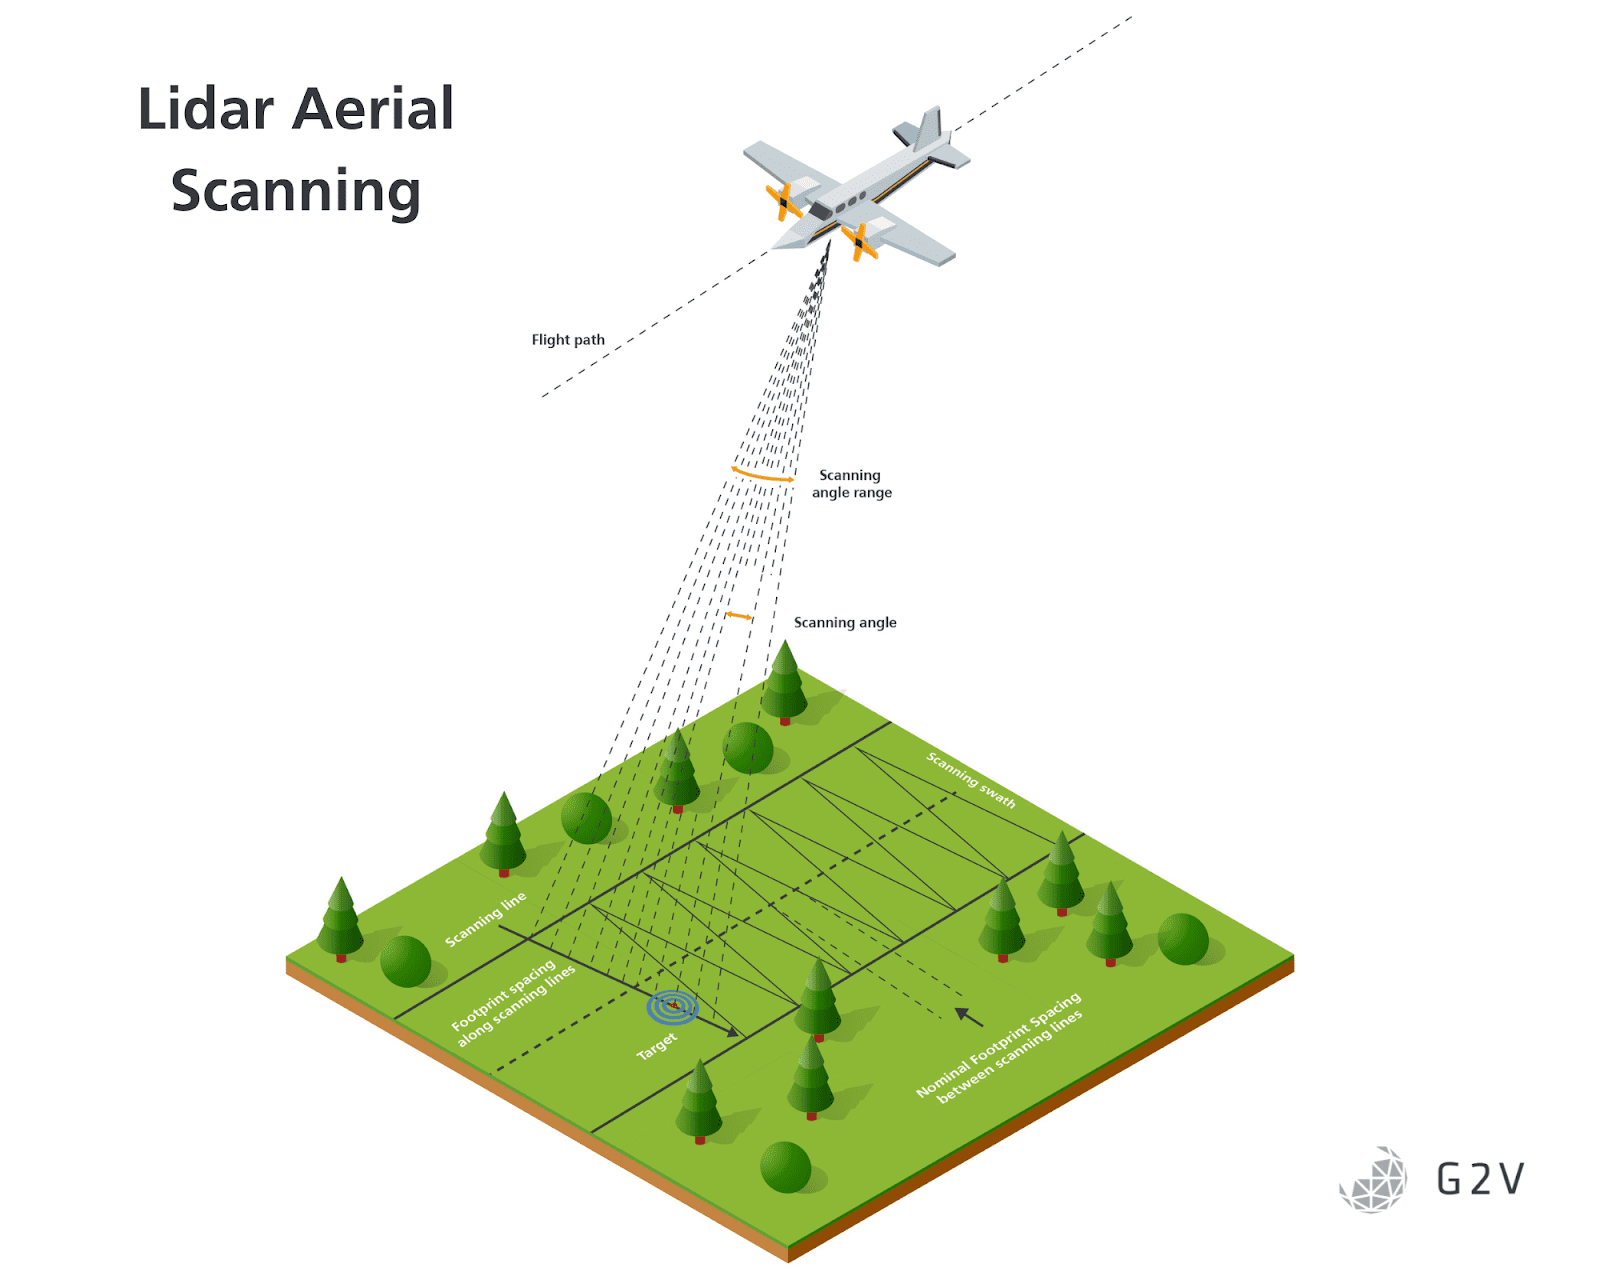 A typical scanning LIDAR measurement by an aircraft